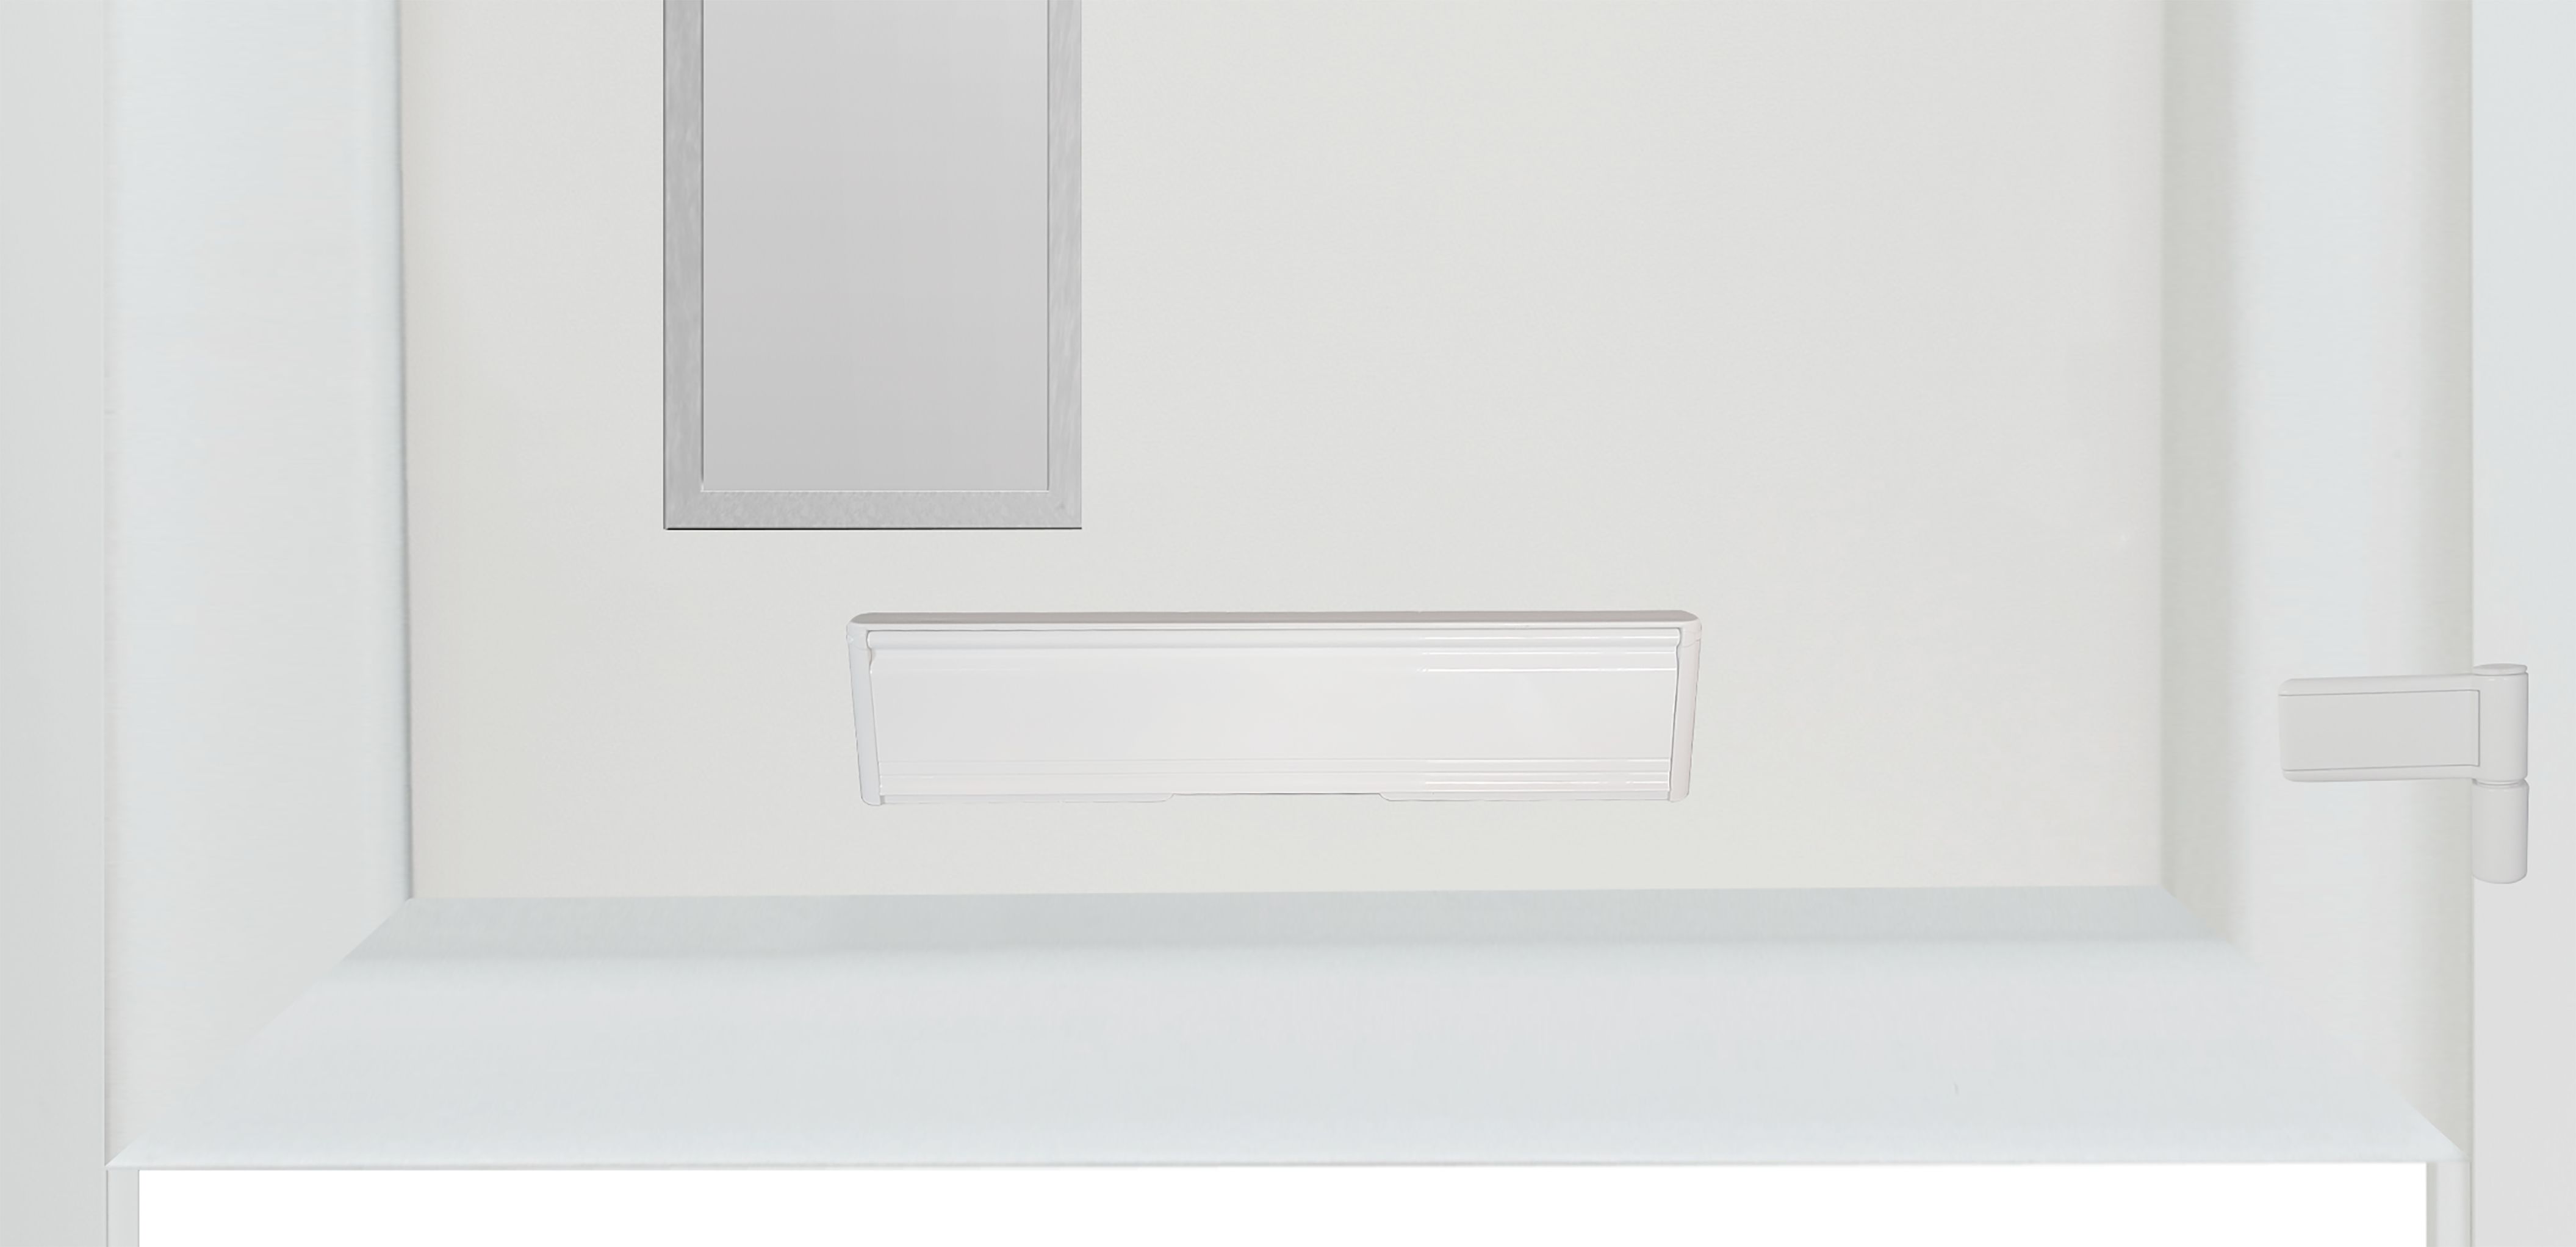 Fortia Gatteo Frosted Glazed White LH External Front Door set, (H)2085mm (W)840mm